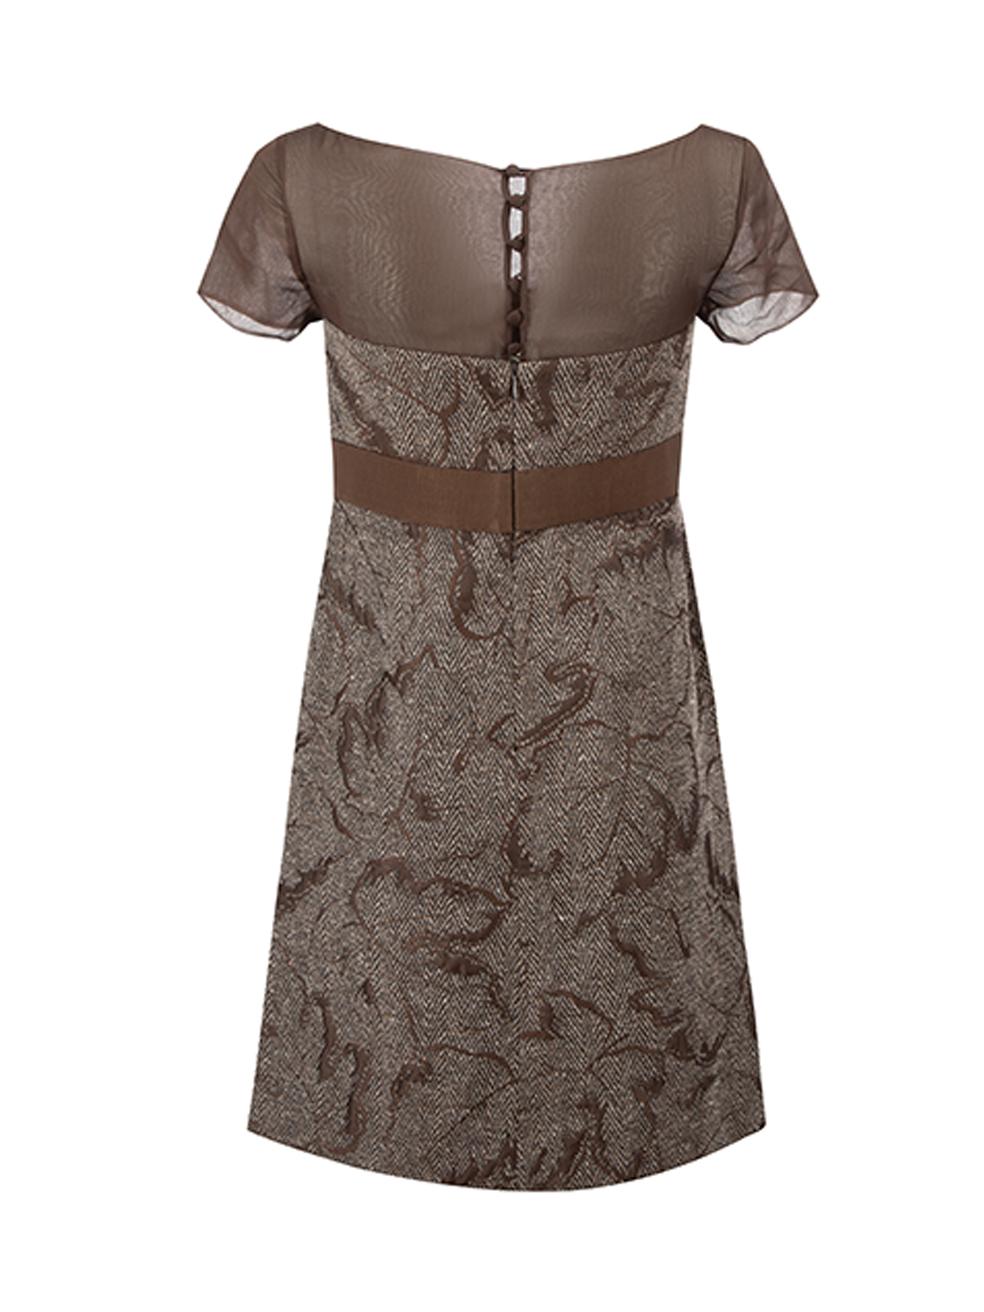 Valentino Women's Brown Bow Detail Shortsleeve Dress In Good Condition For Sale In London, GB